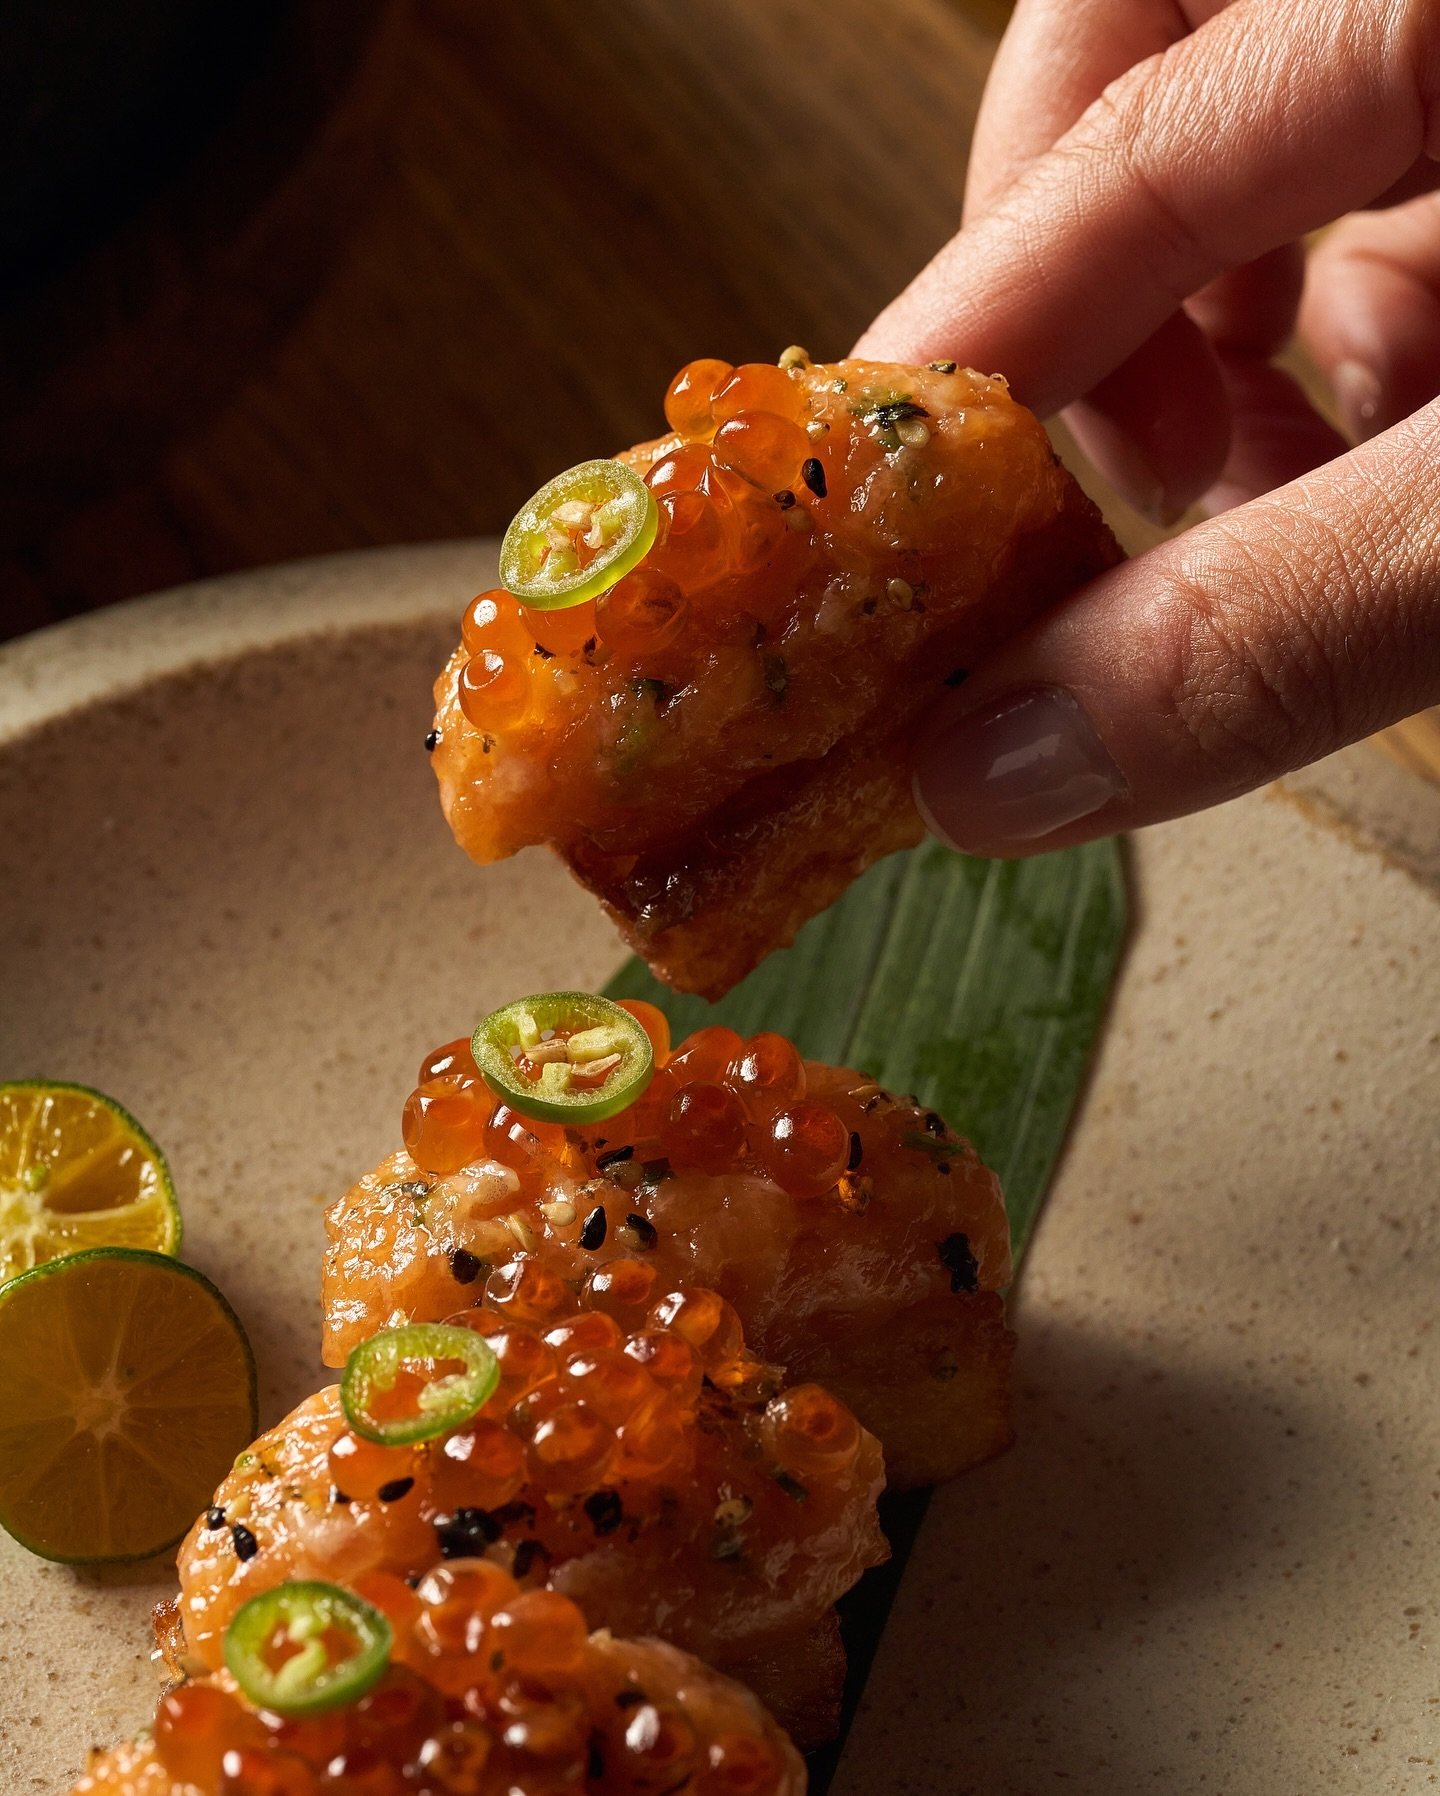 Begin your MILA experience with the perfect bite. Discover our Salmon Crispy Rice, made with fresh salmon, ikura, and katsuo furikake. #MILArestaurant